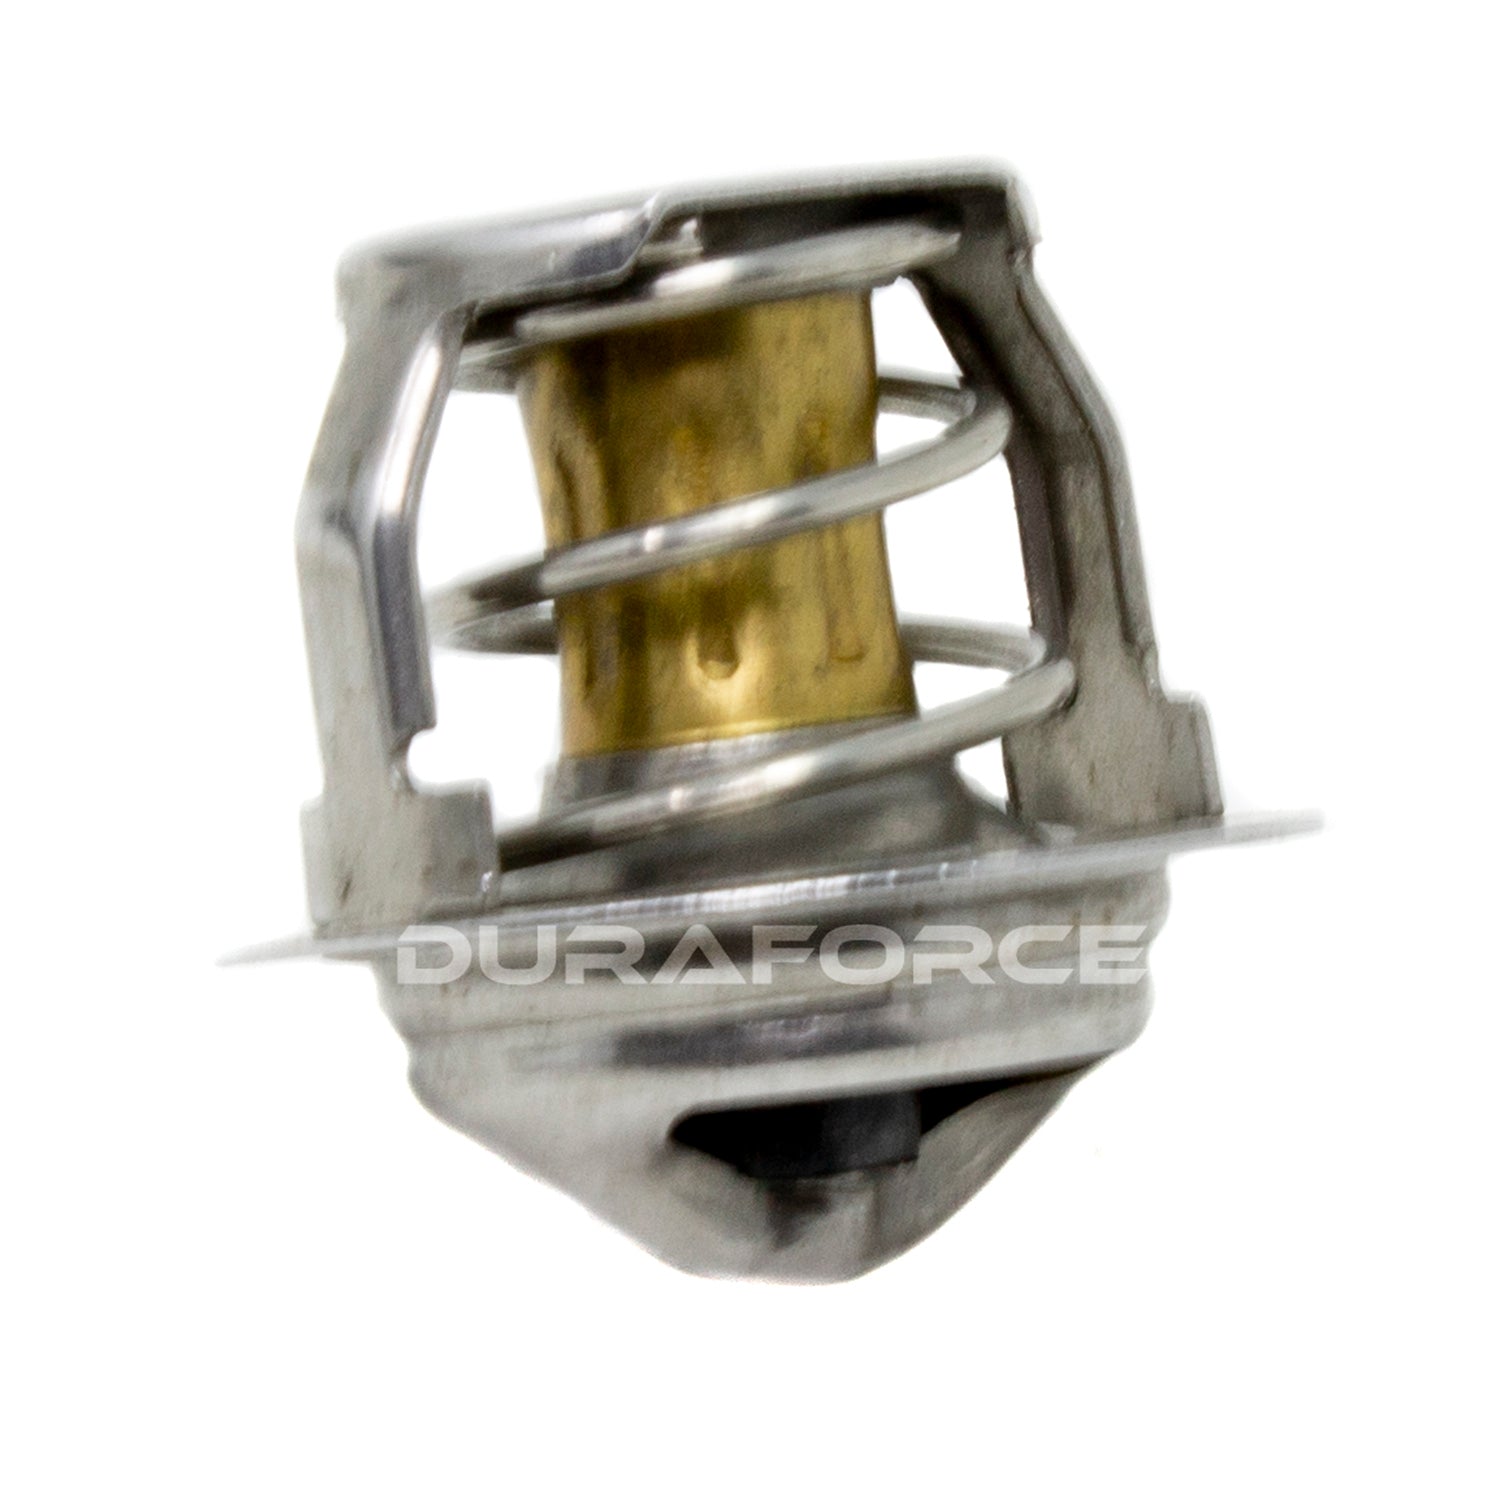 Duraforce 6674172, Thermostat For Bobcat